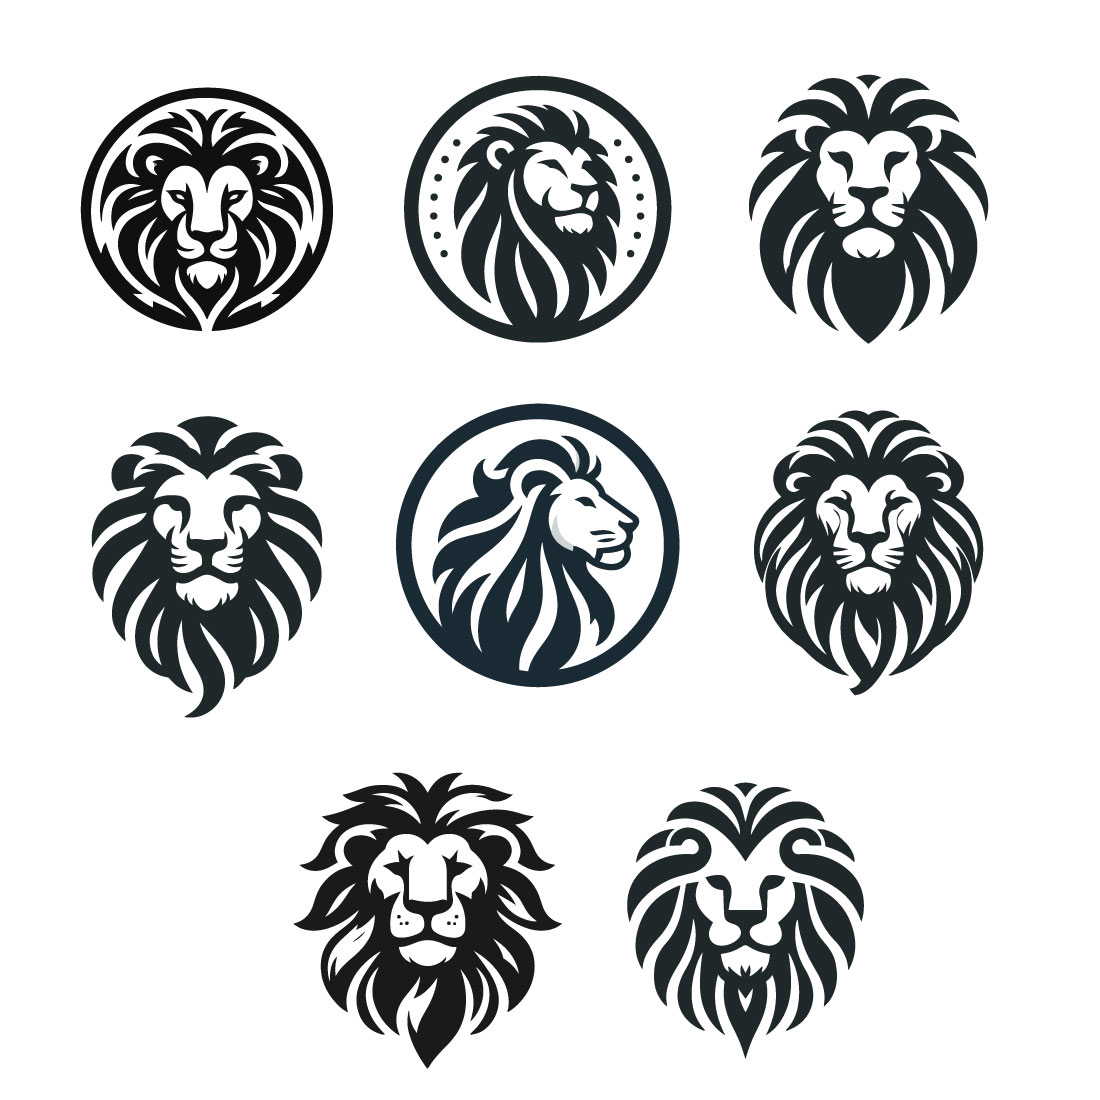 8 Lion Logos Vector Illustration preview image.